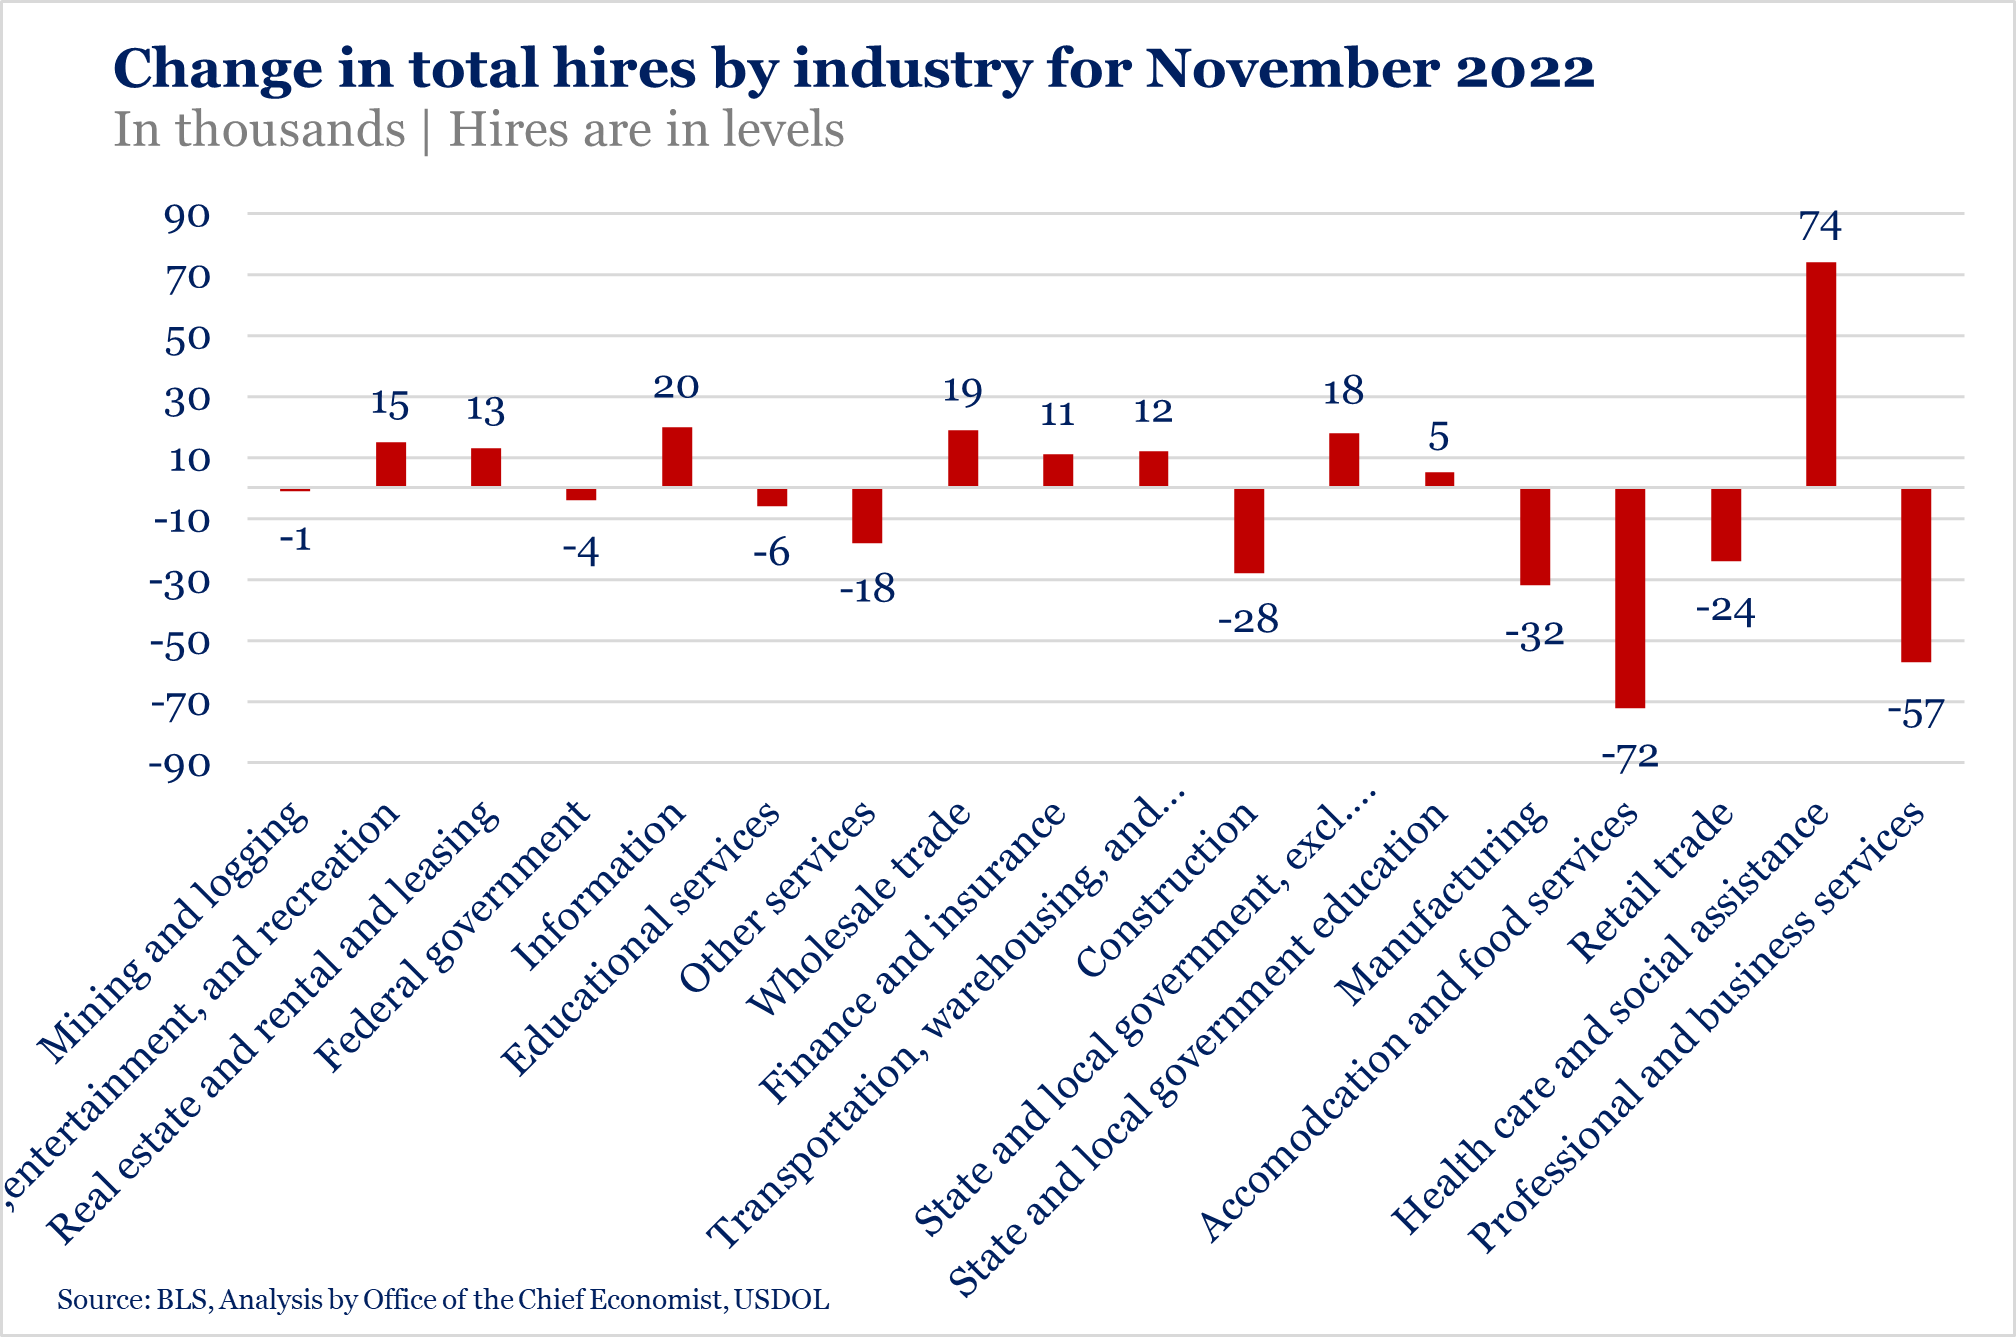 Change in Total Hires by Industry for November 2022